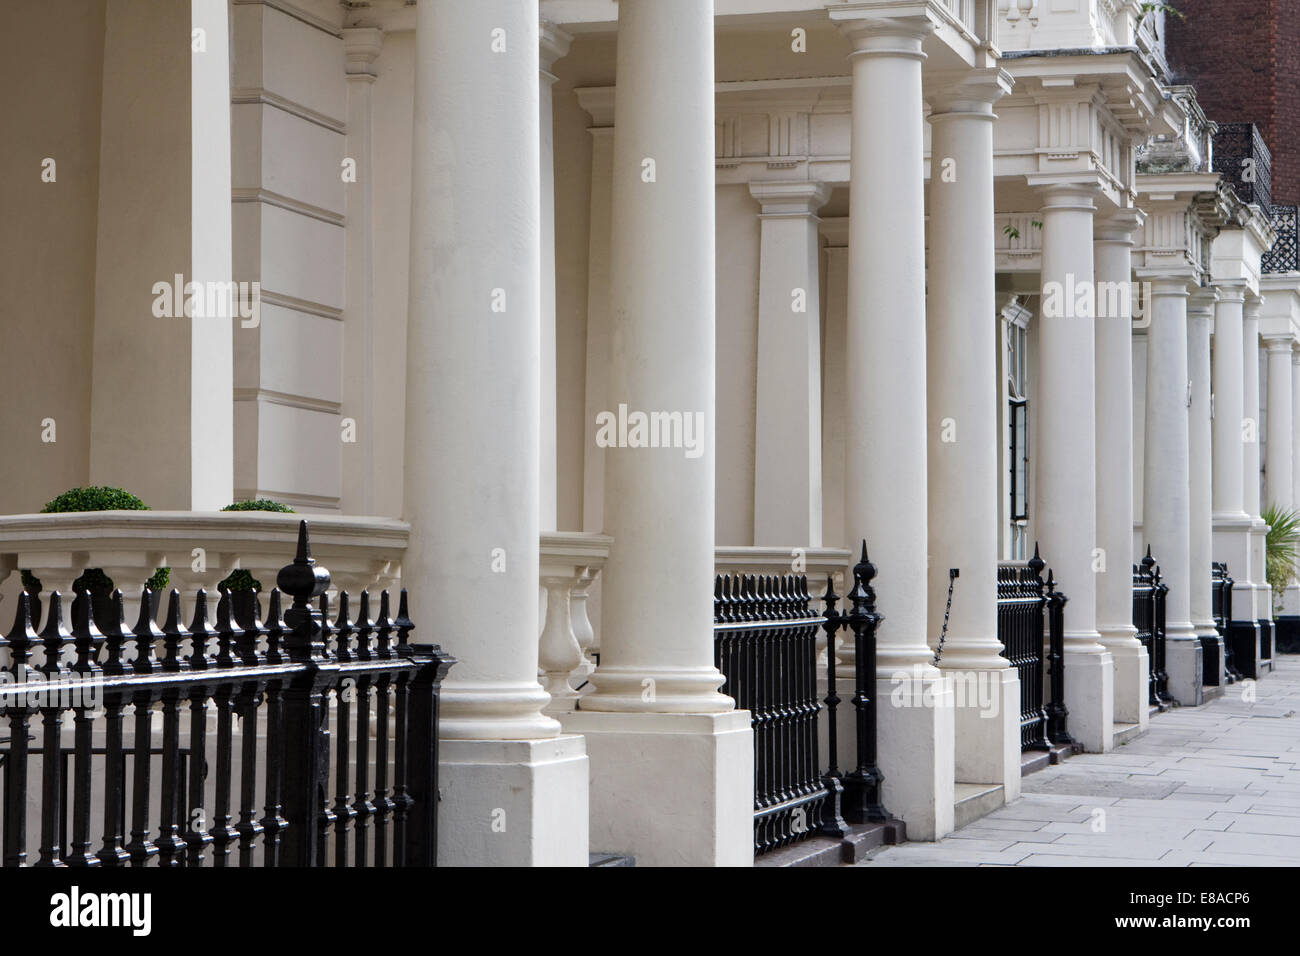 Nice looking entrances in Bayswater, London - Stock Image. Stock Photo